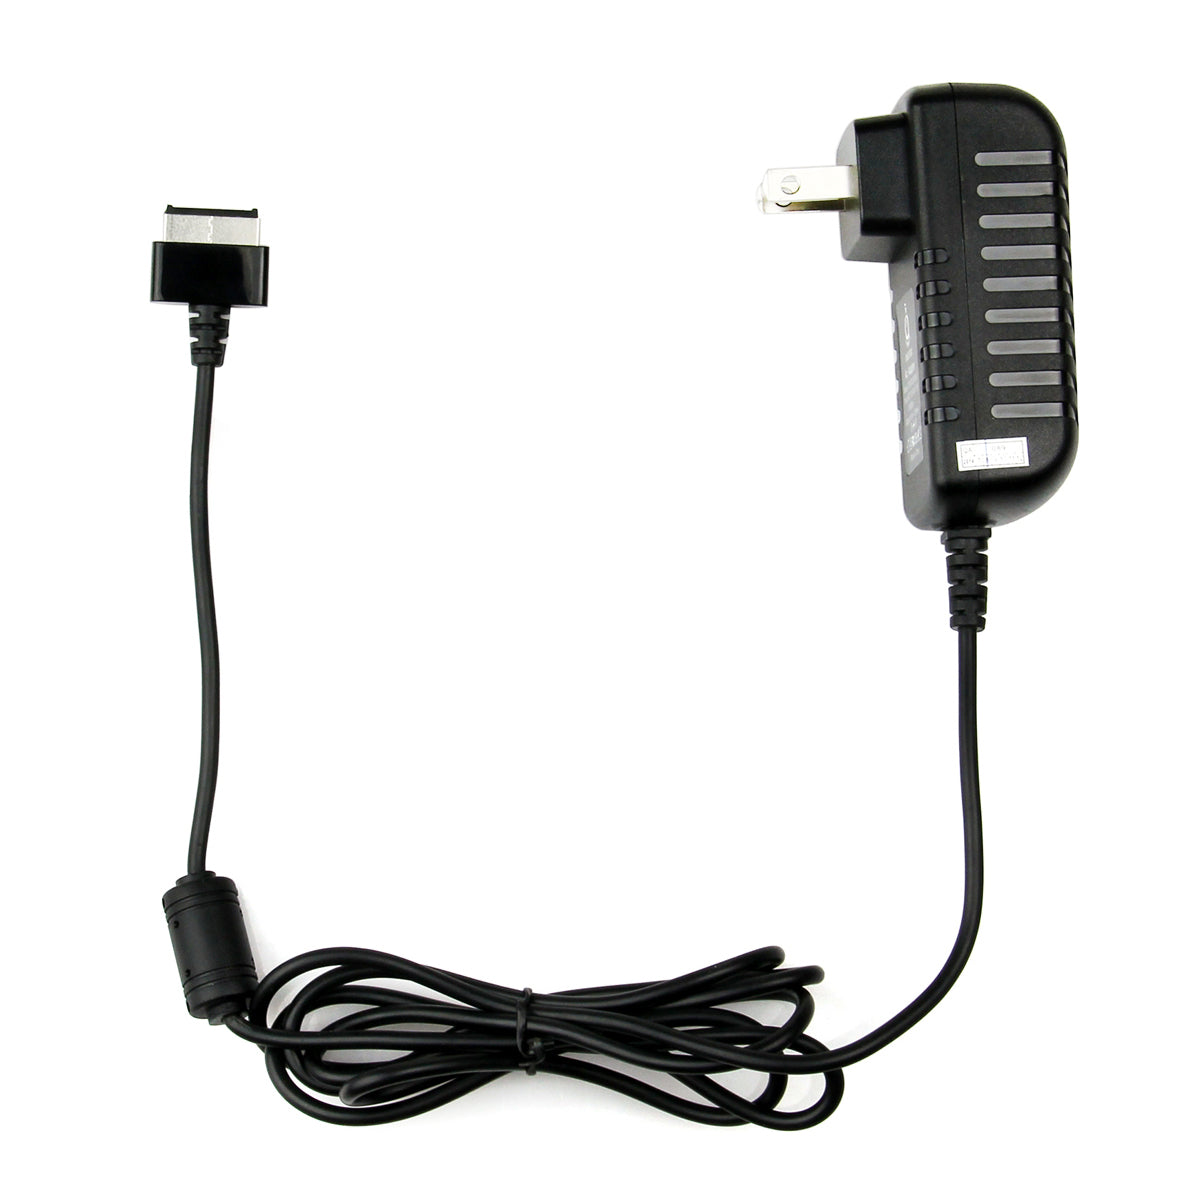 AC Adapter Charger for ASUS TF700T-C1-CG Eee Pad.